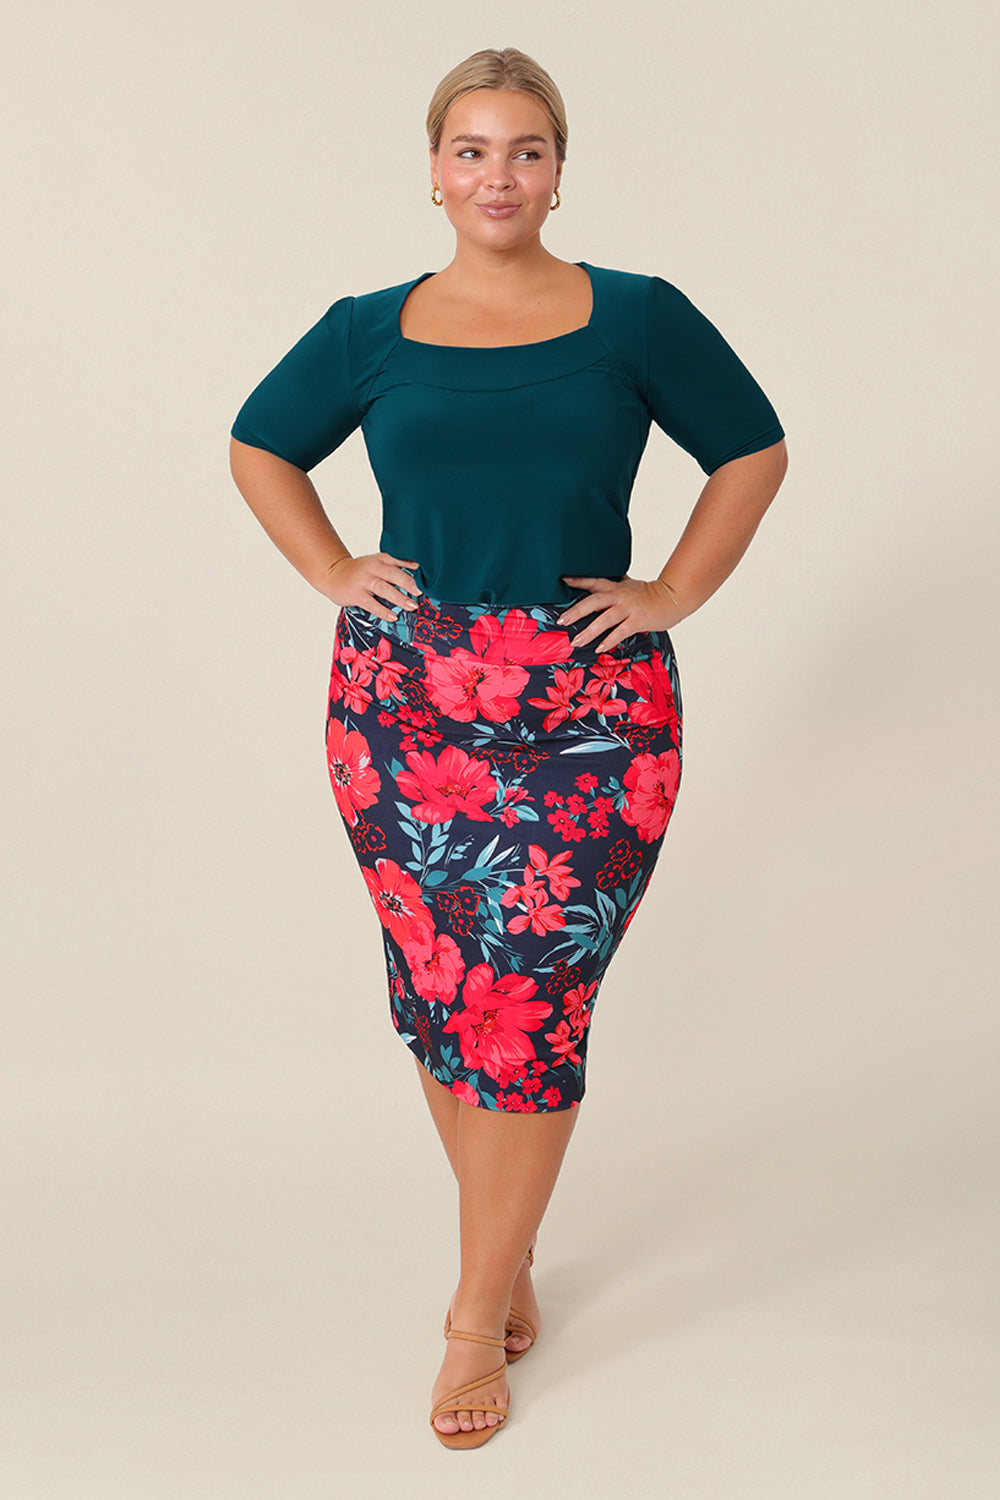 A curvy size 16 woman wears good work wear for plus size women, a knee-length tube skirt in floral print. Made in Australia, shop this work skirt online in sizes 8 to 24.